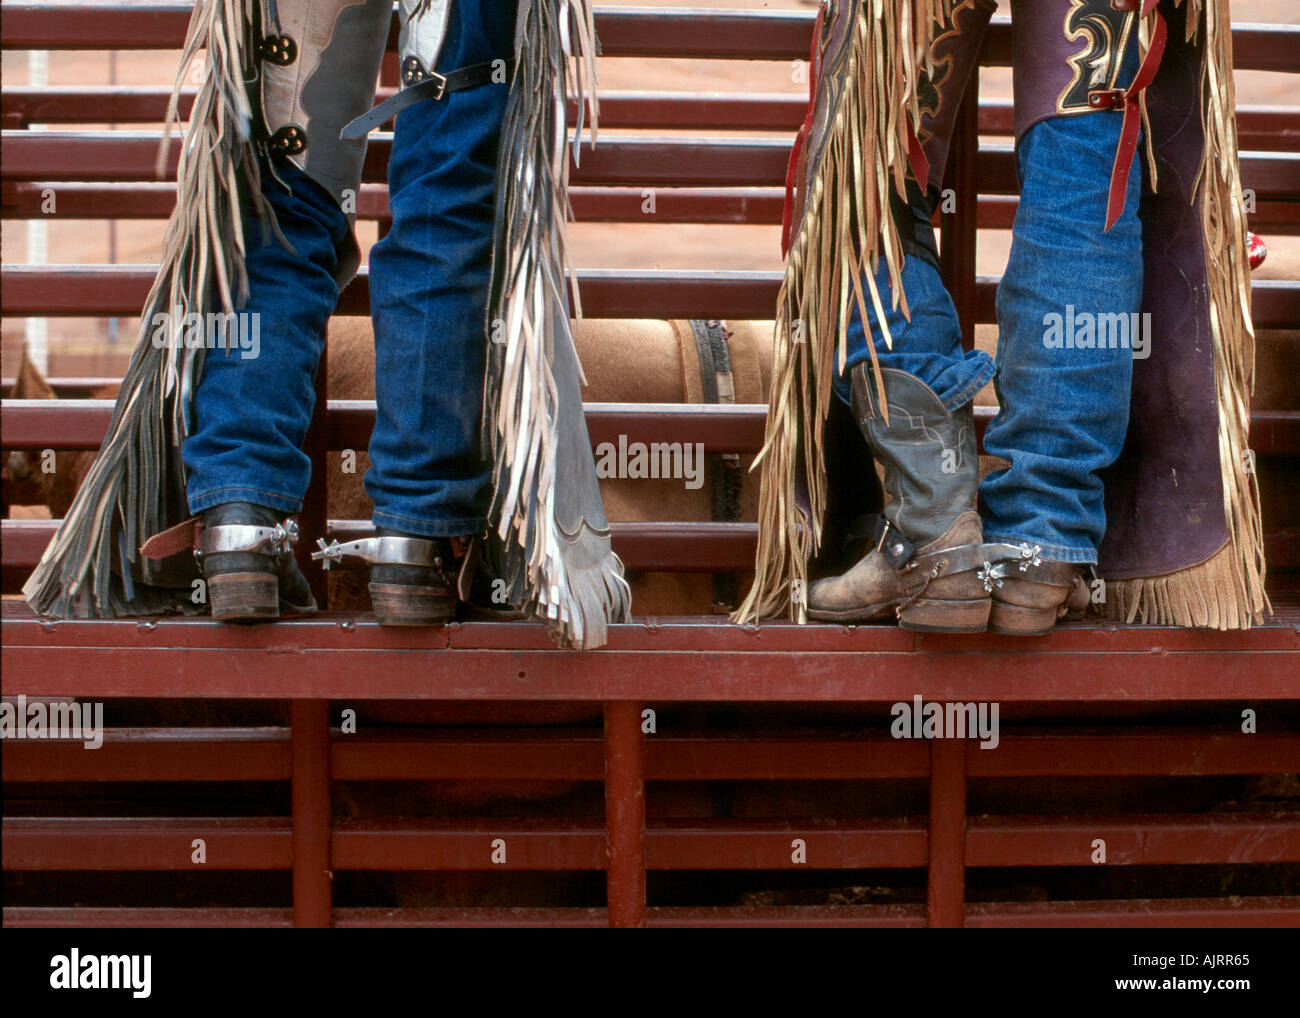 Clad in boots spurs and western chaps two rodeo cowboys prepare for their next turn to ride Stock Photo